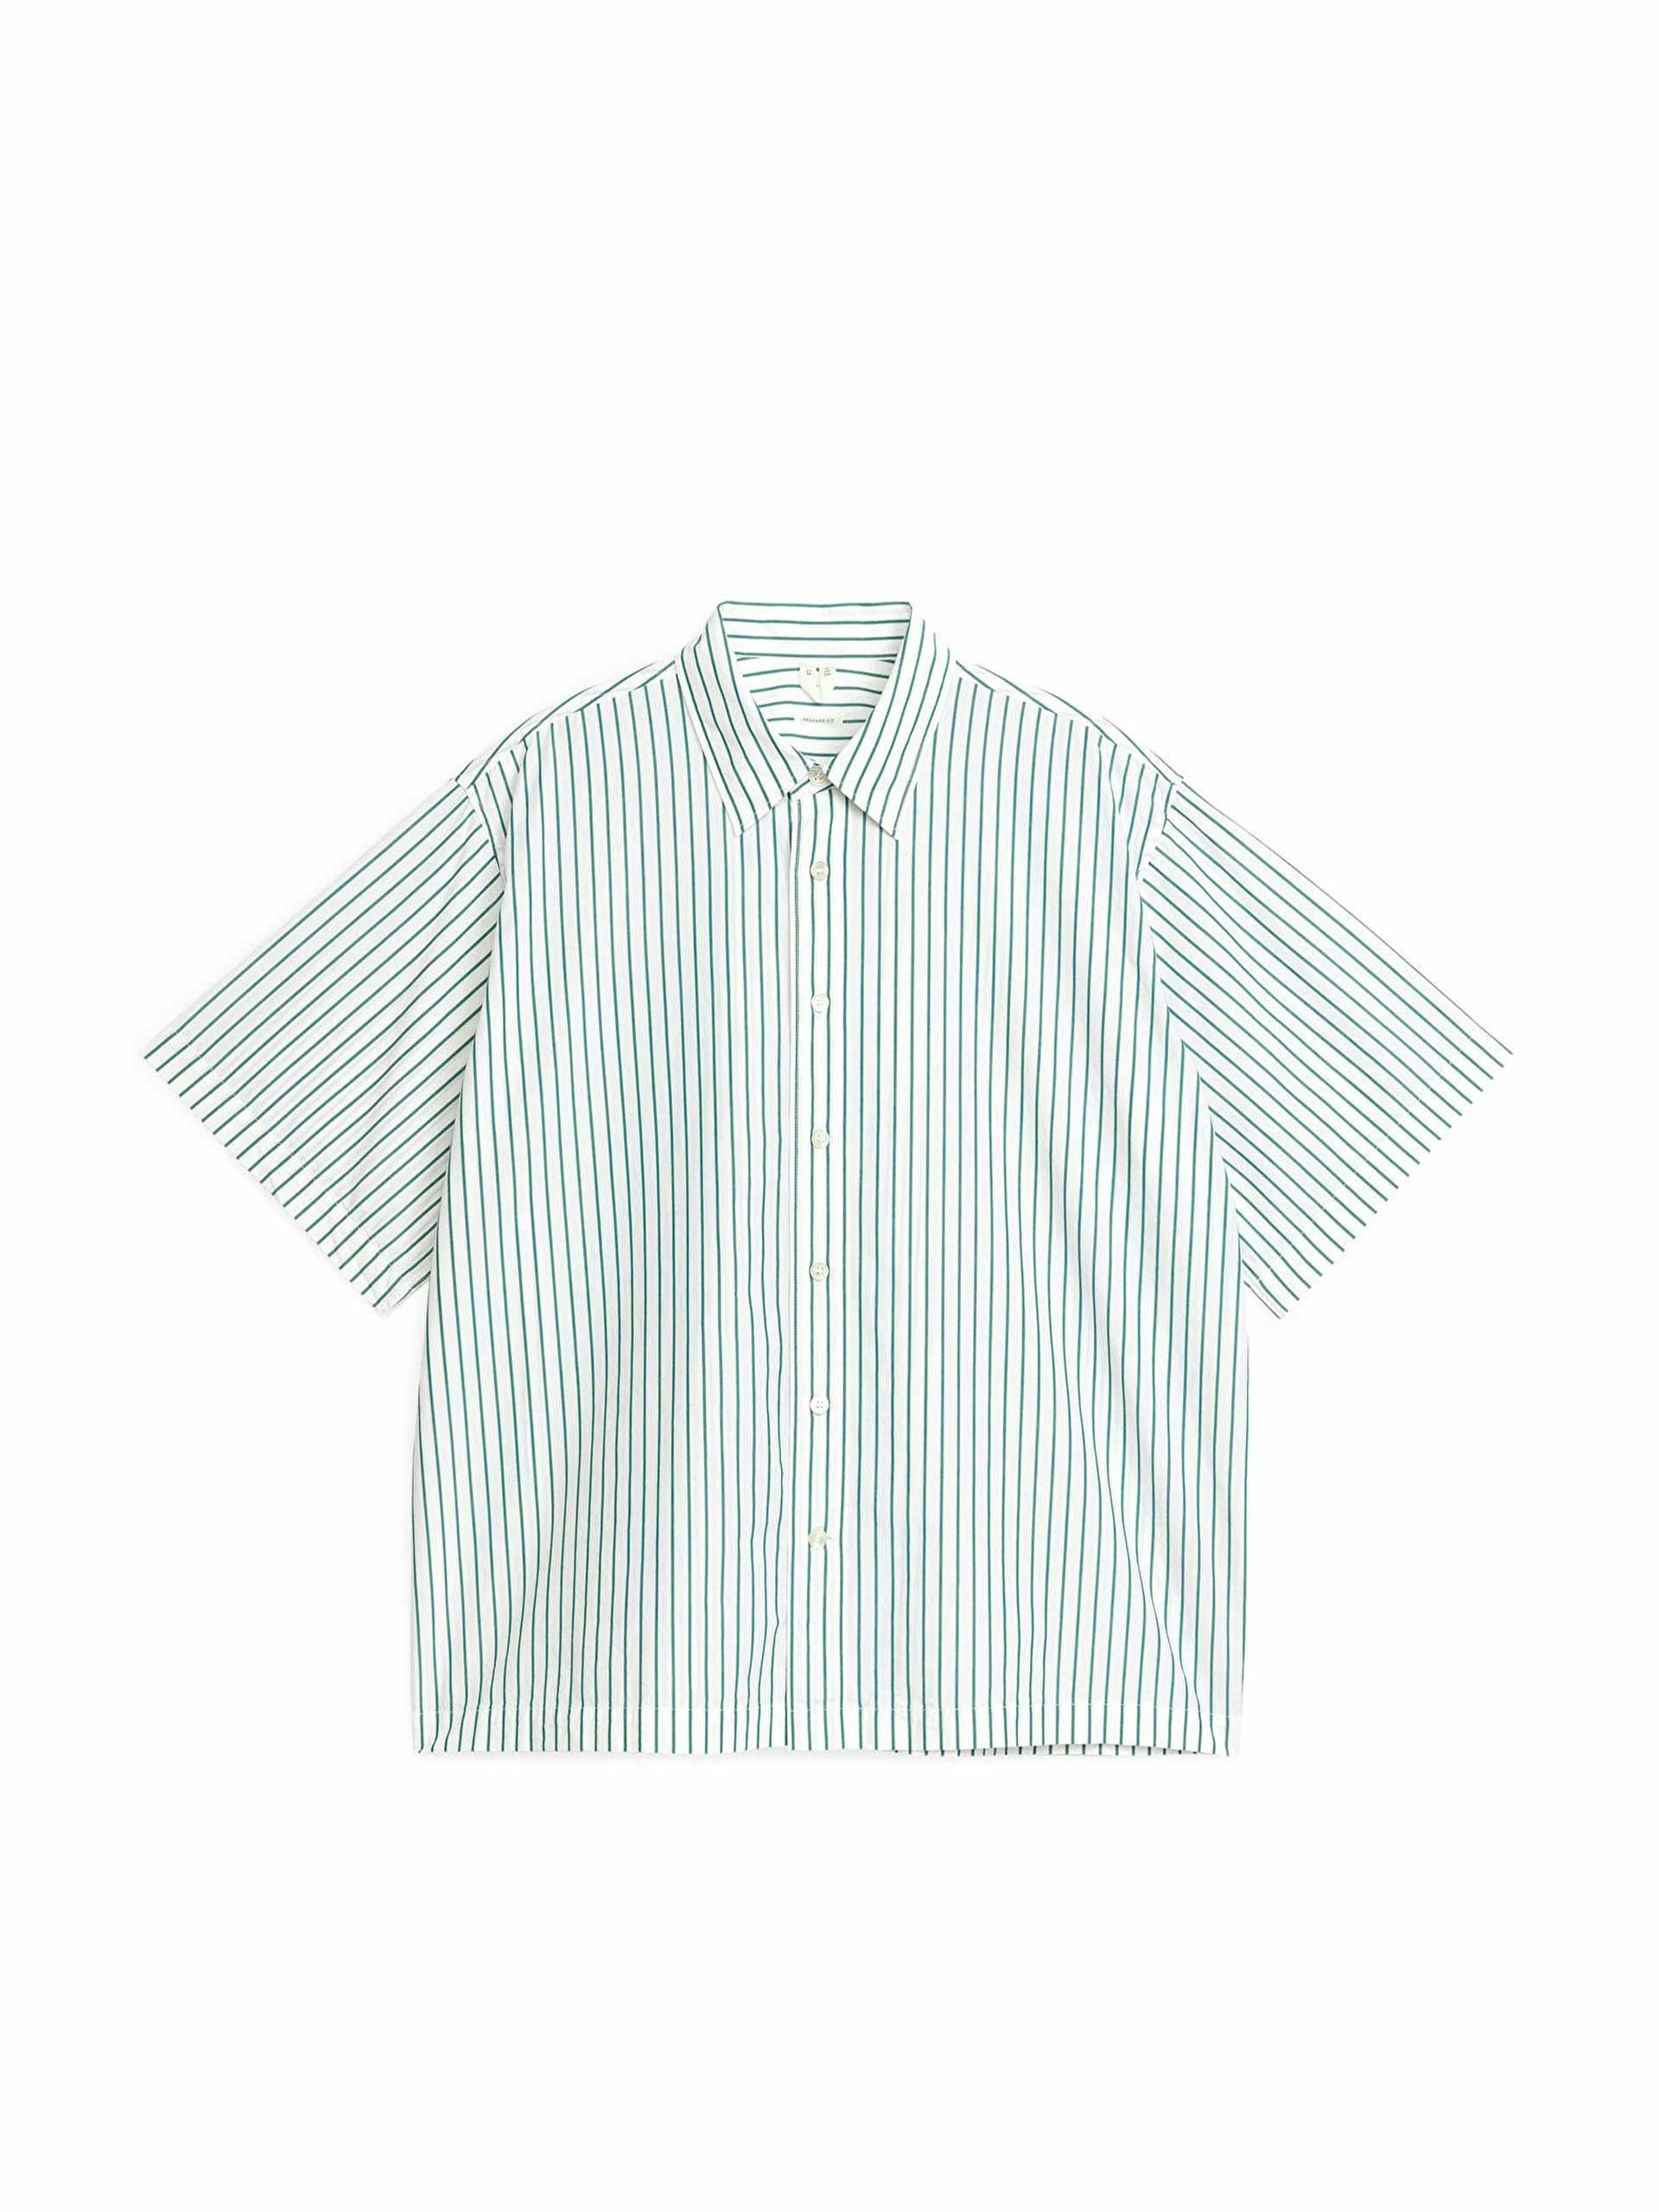 Green and white striped polo shirt